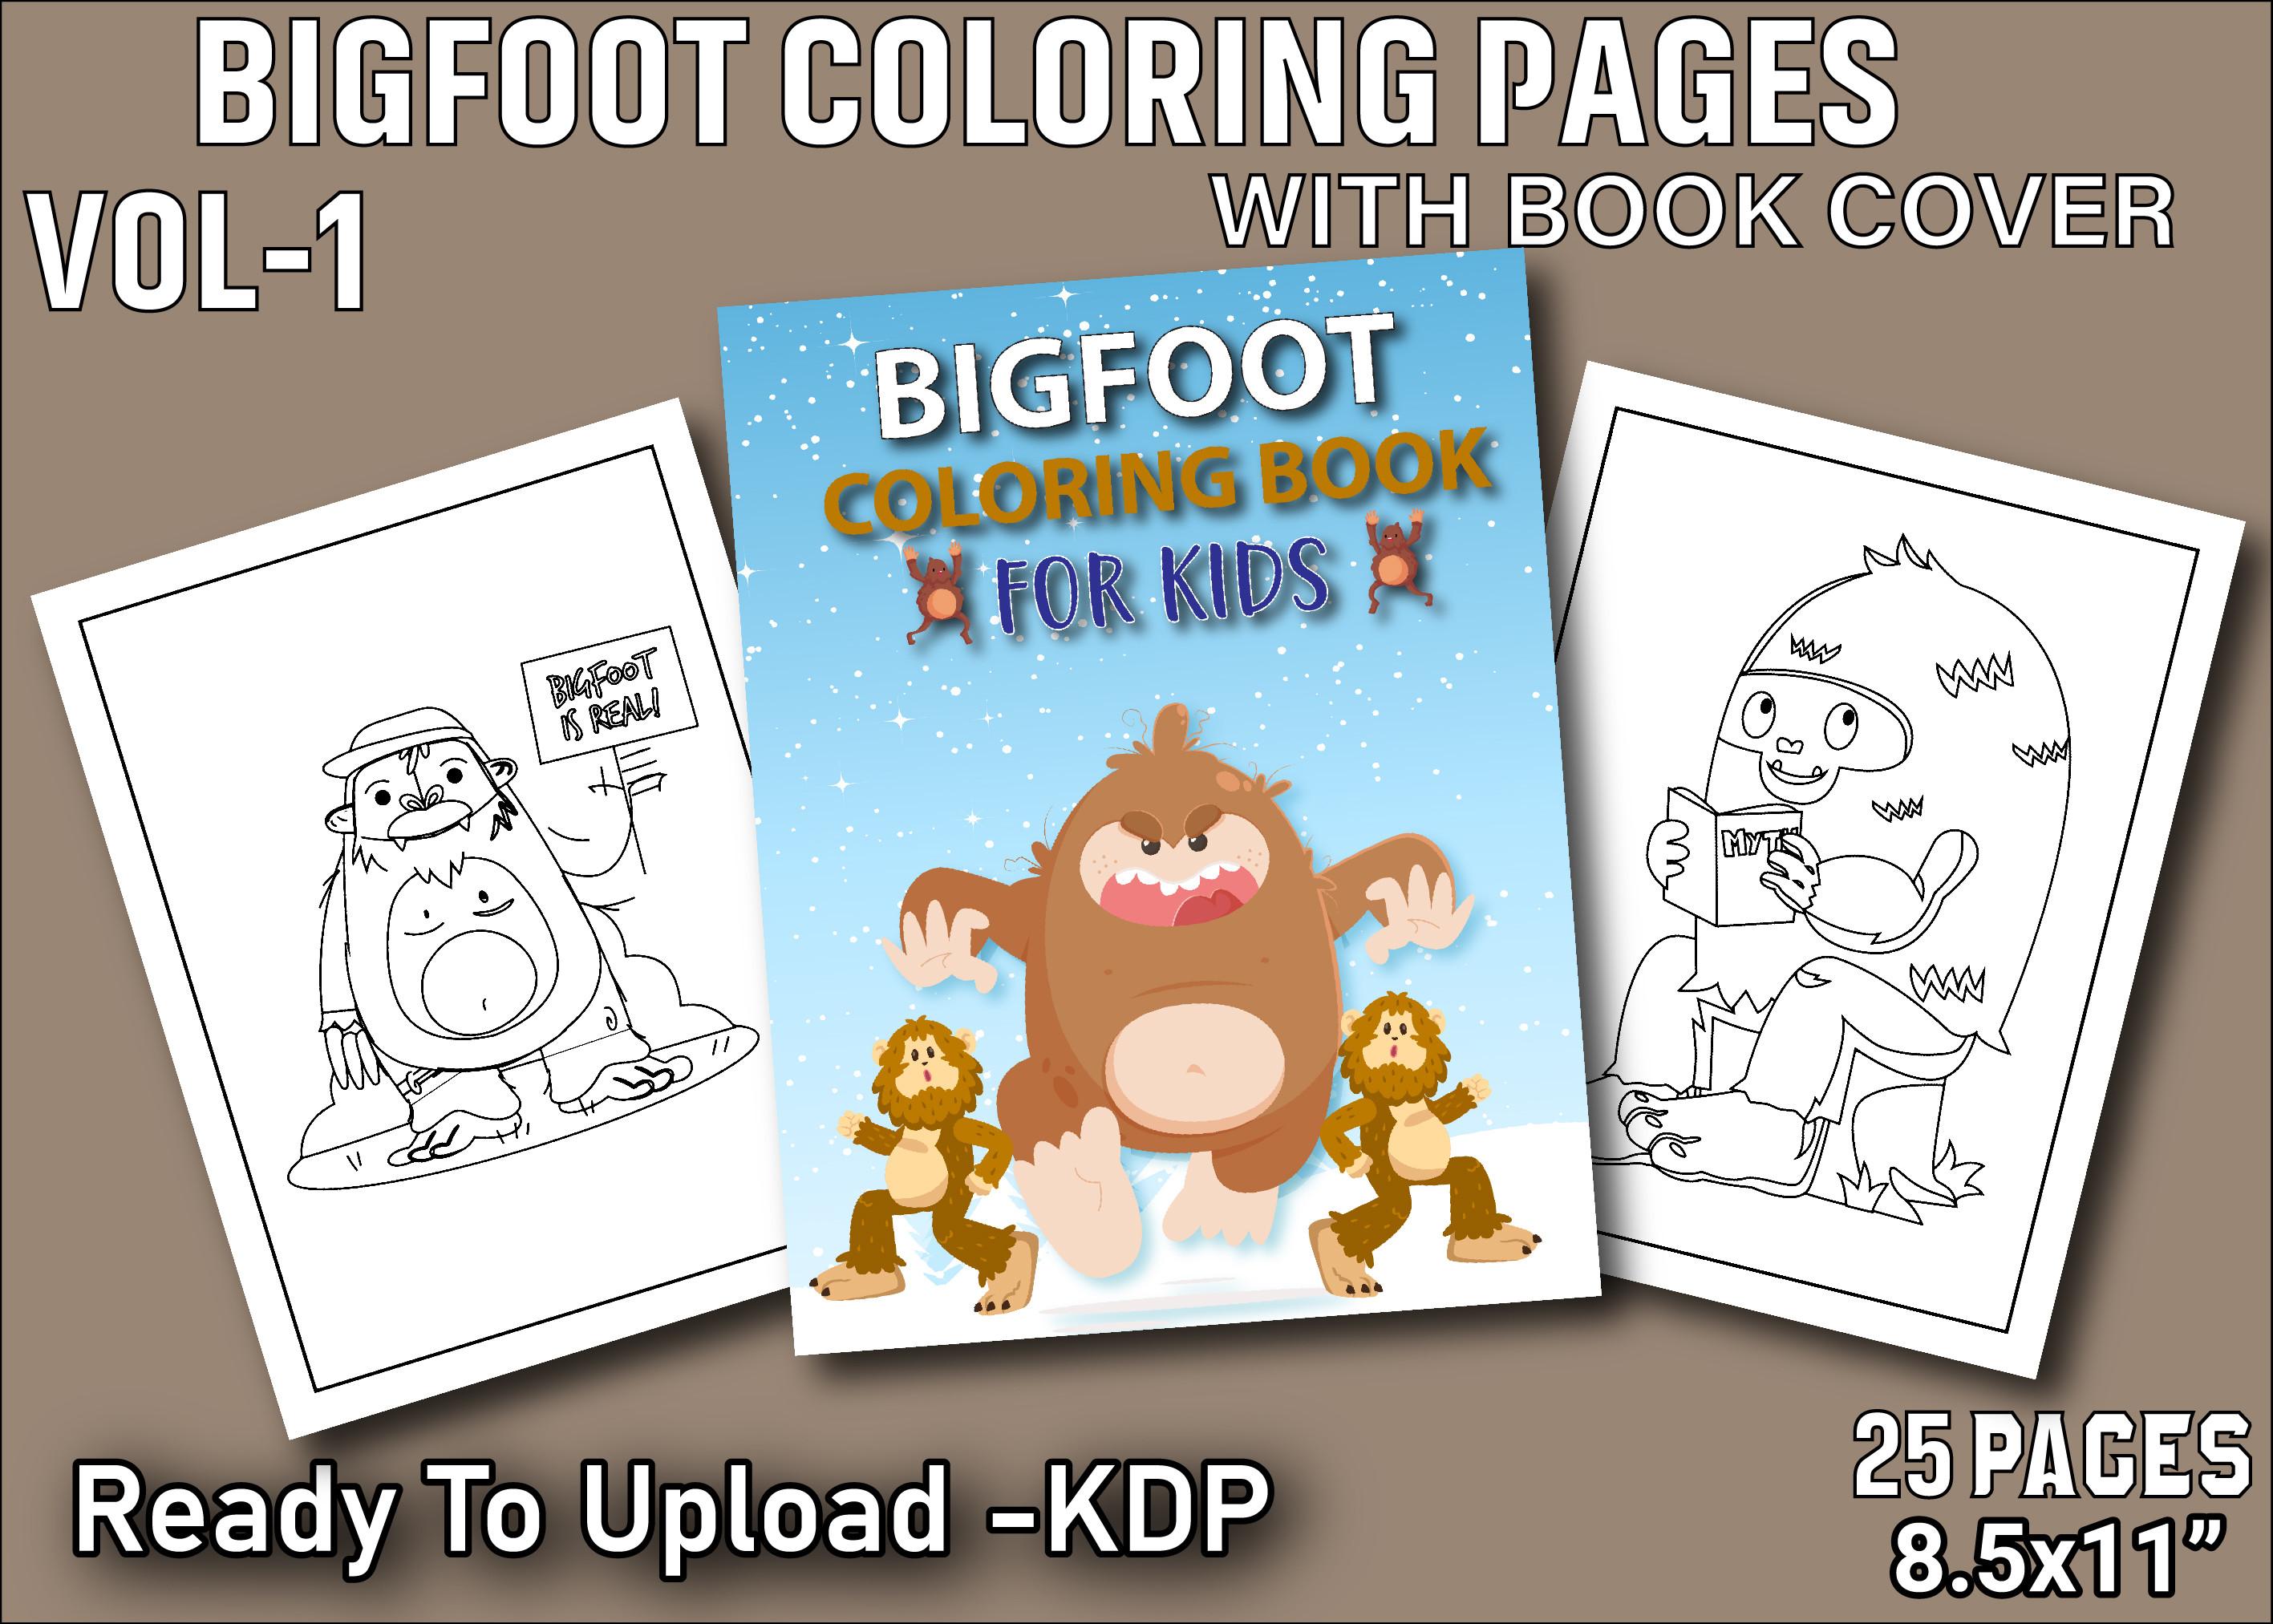 Bigfoot Coloring Pages with Cover Vol-1